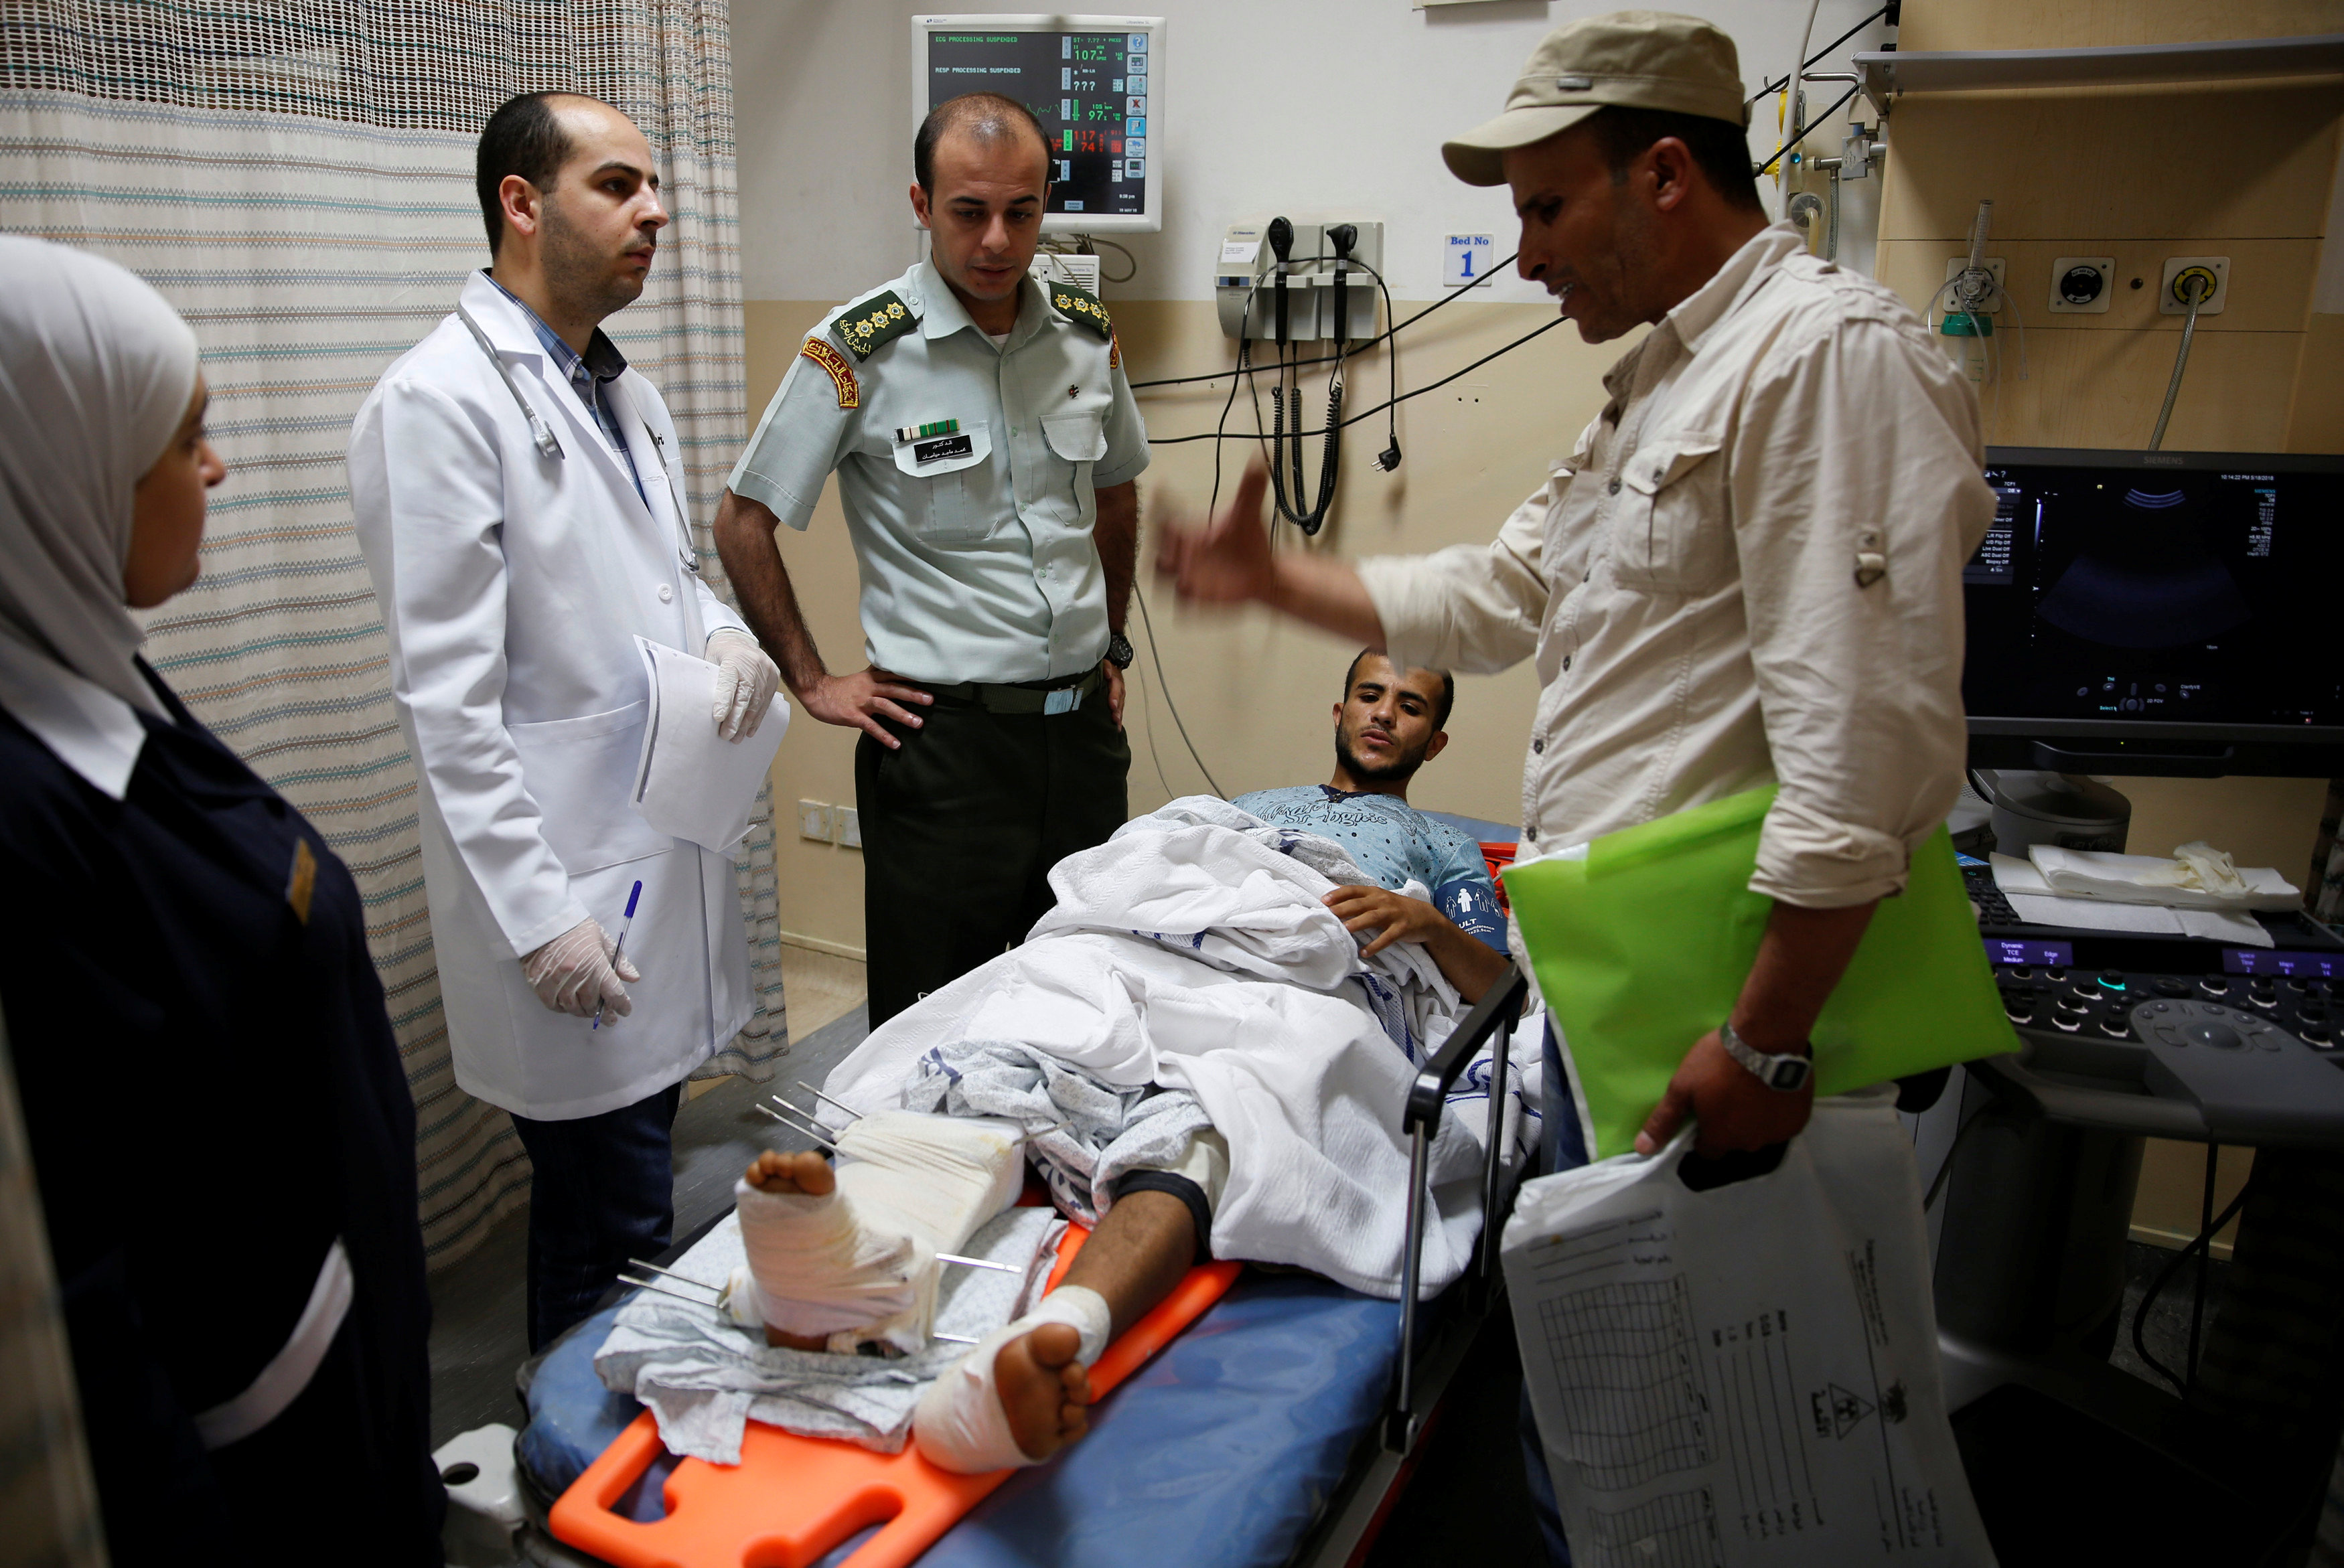 An injured Palestinian man from Gaza receives treatment after his arrival at the Al Hussein Medical Centre in Amman